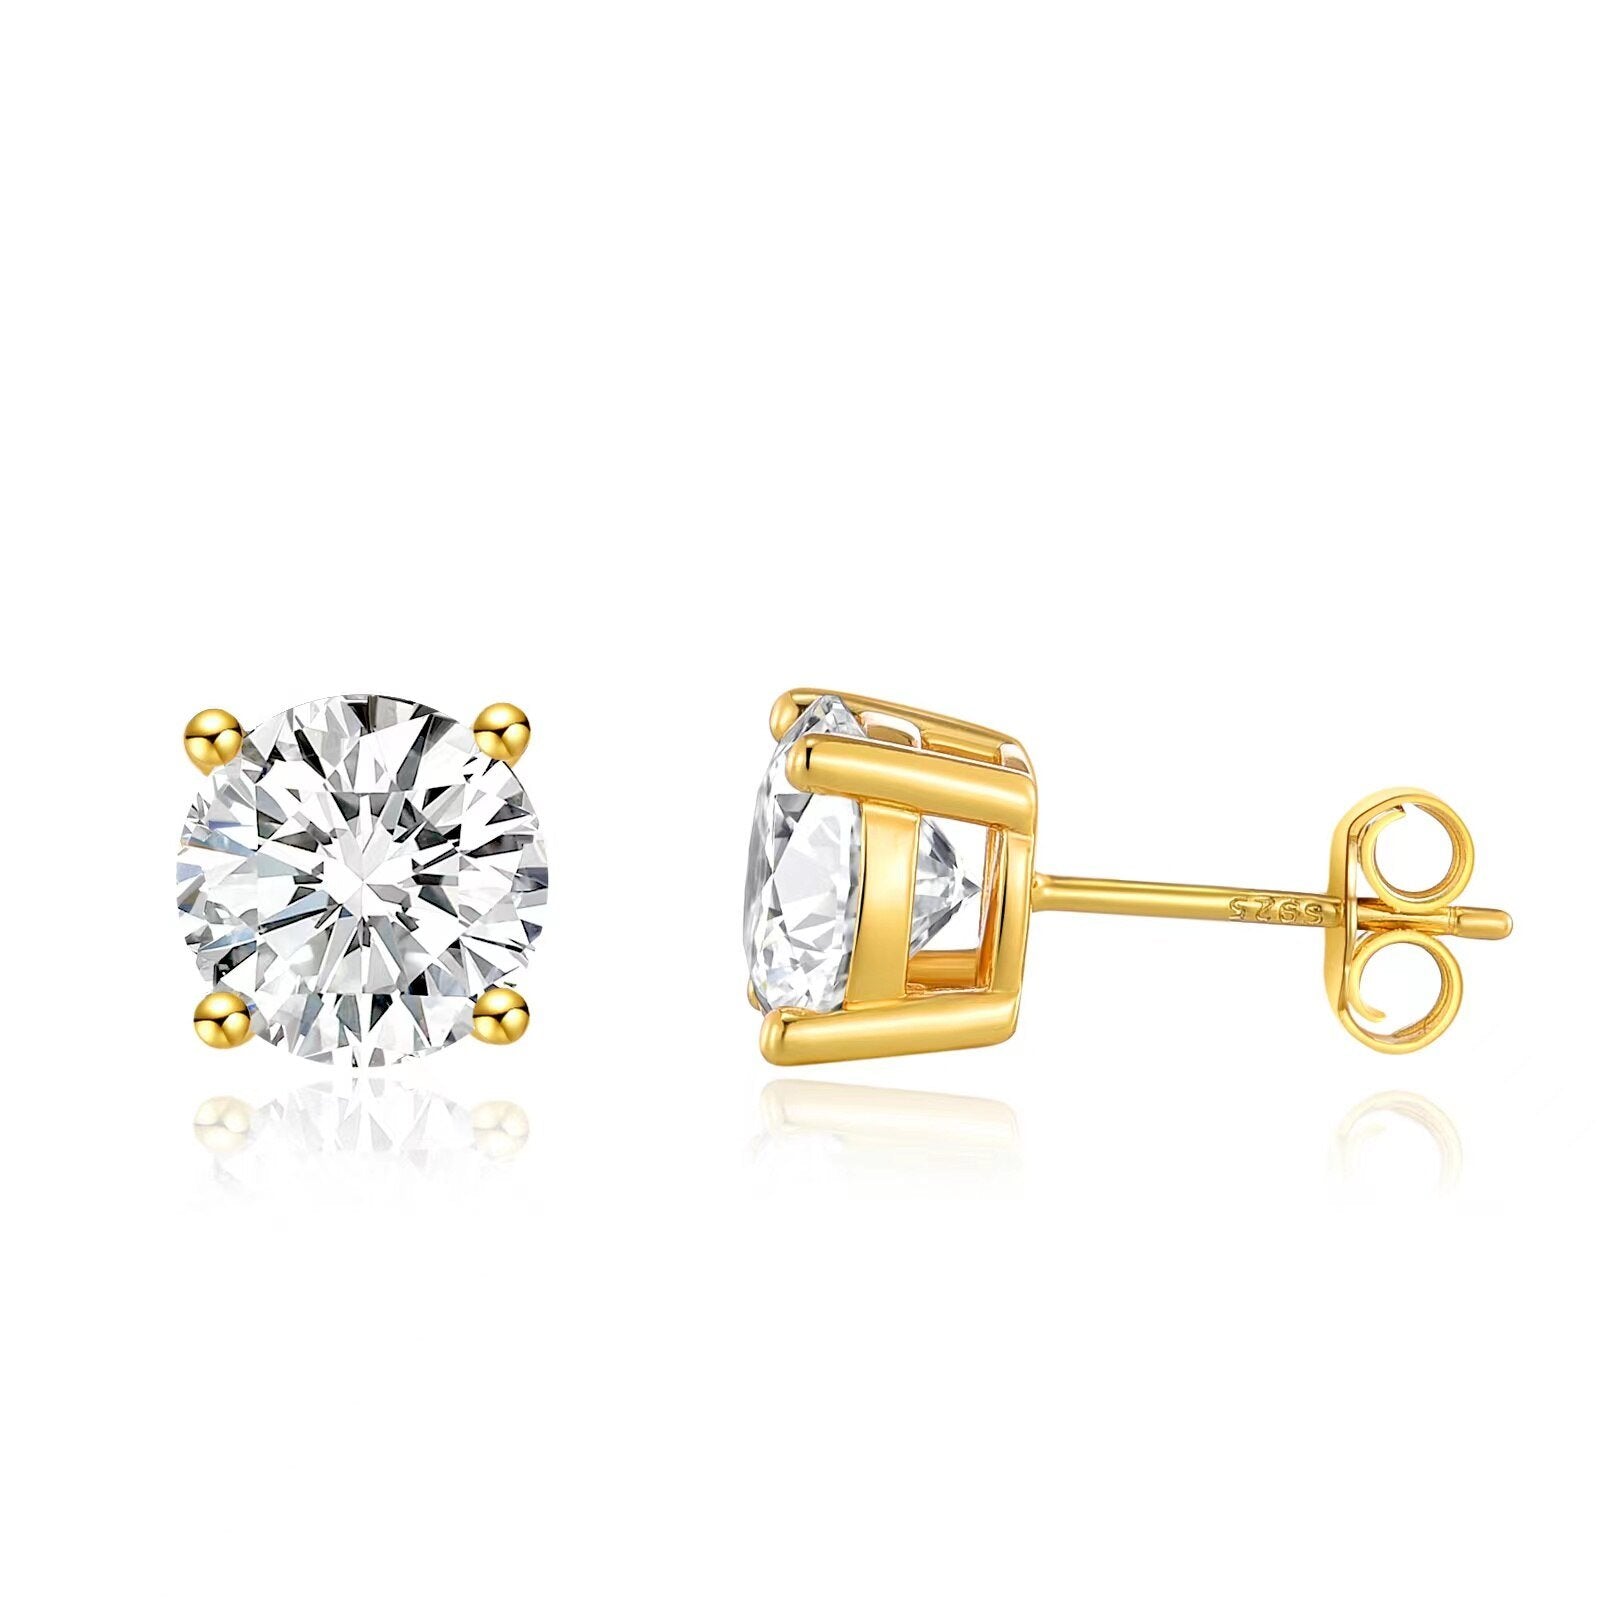 Tiny CZ Studs in gold.